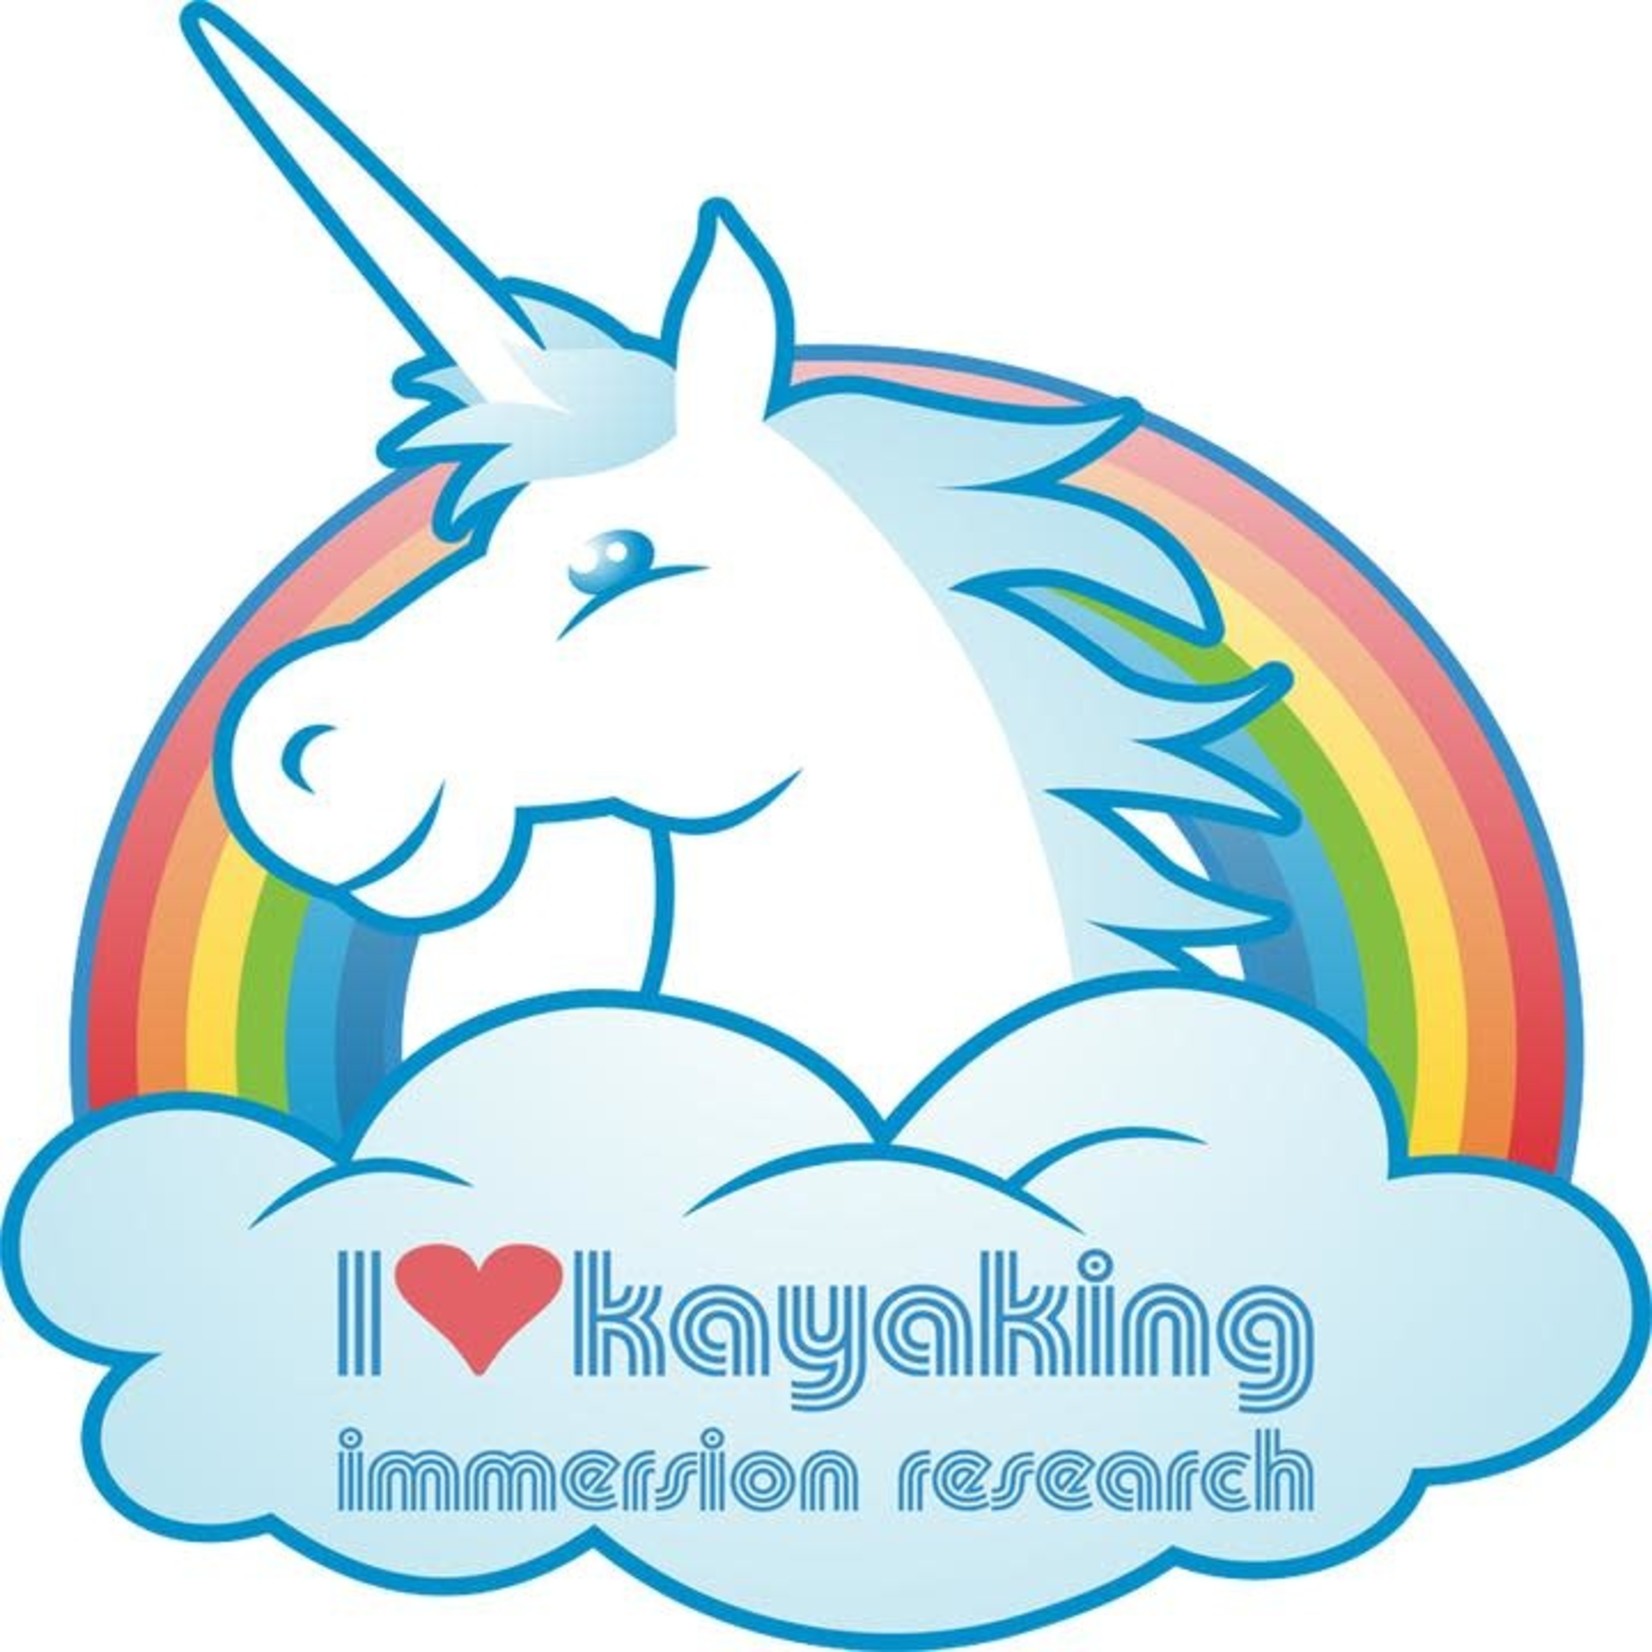 Immersion Research IR I Love Kayaking  (And More!) Sticker